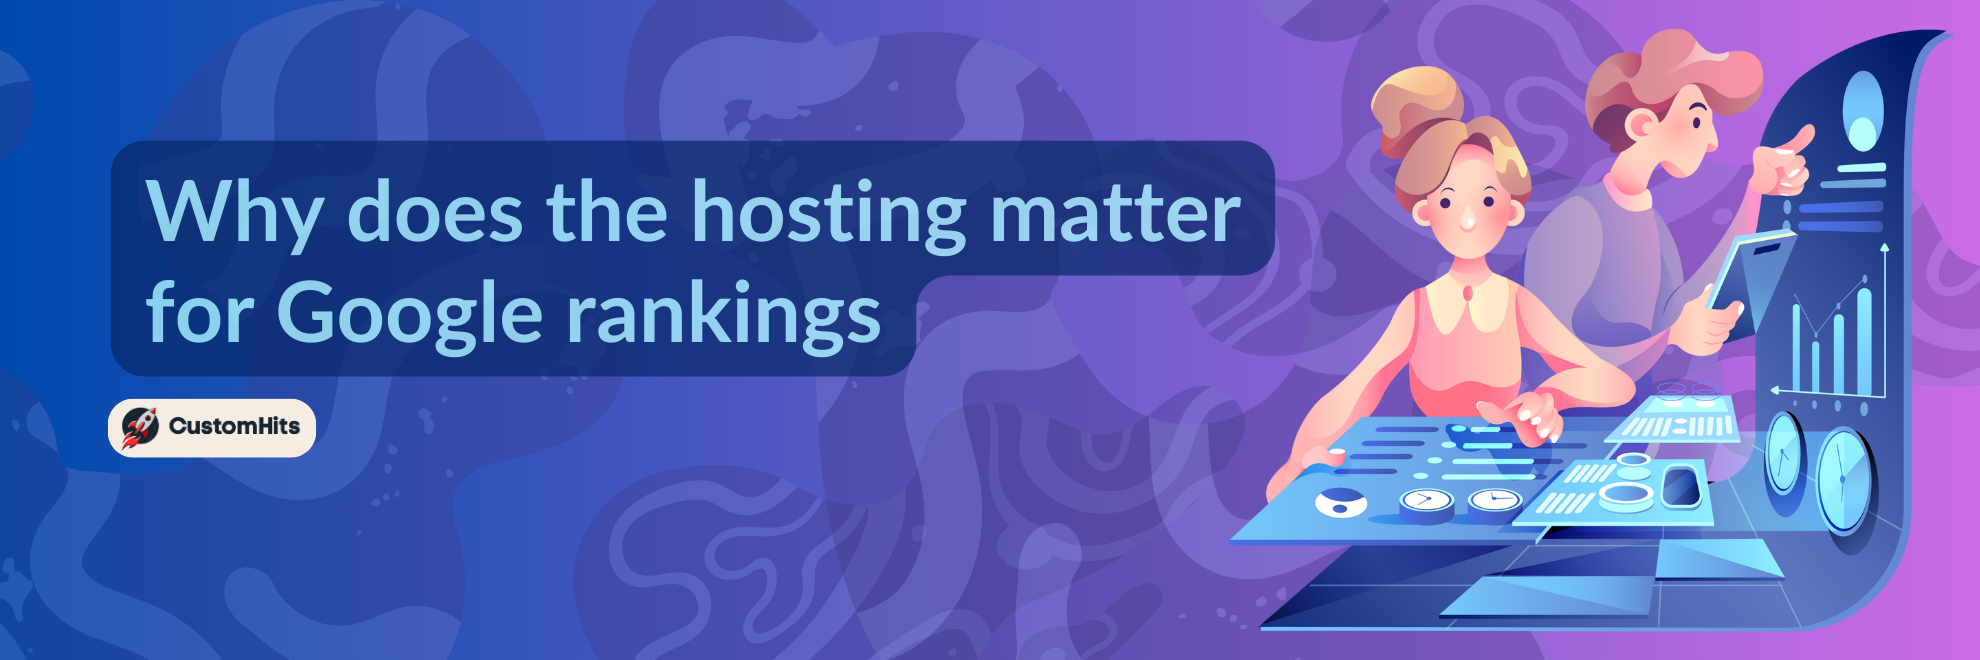 Why does the hosting matter for Google rankings